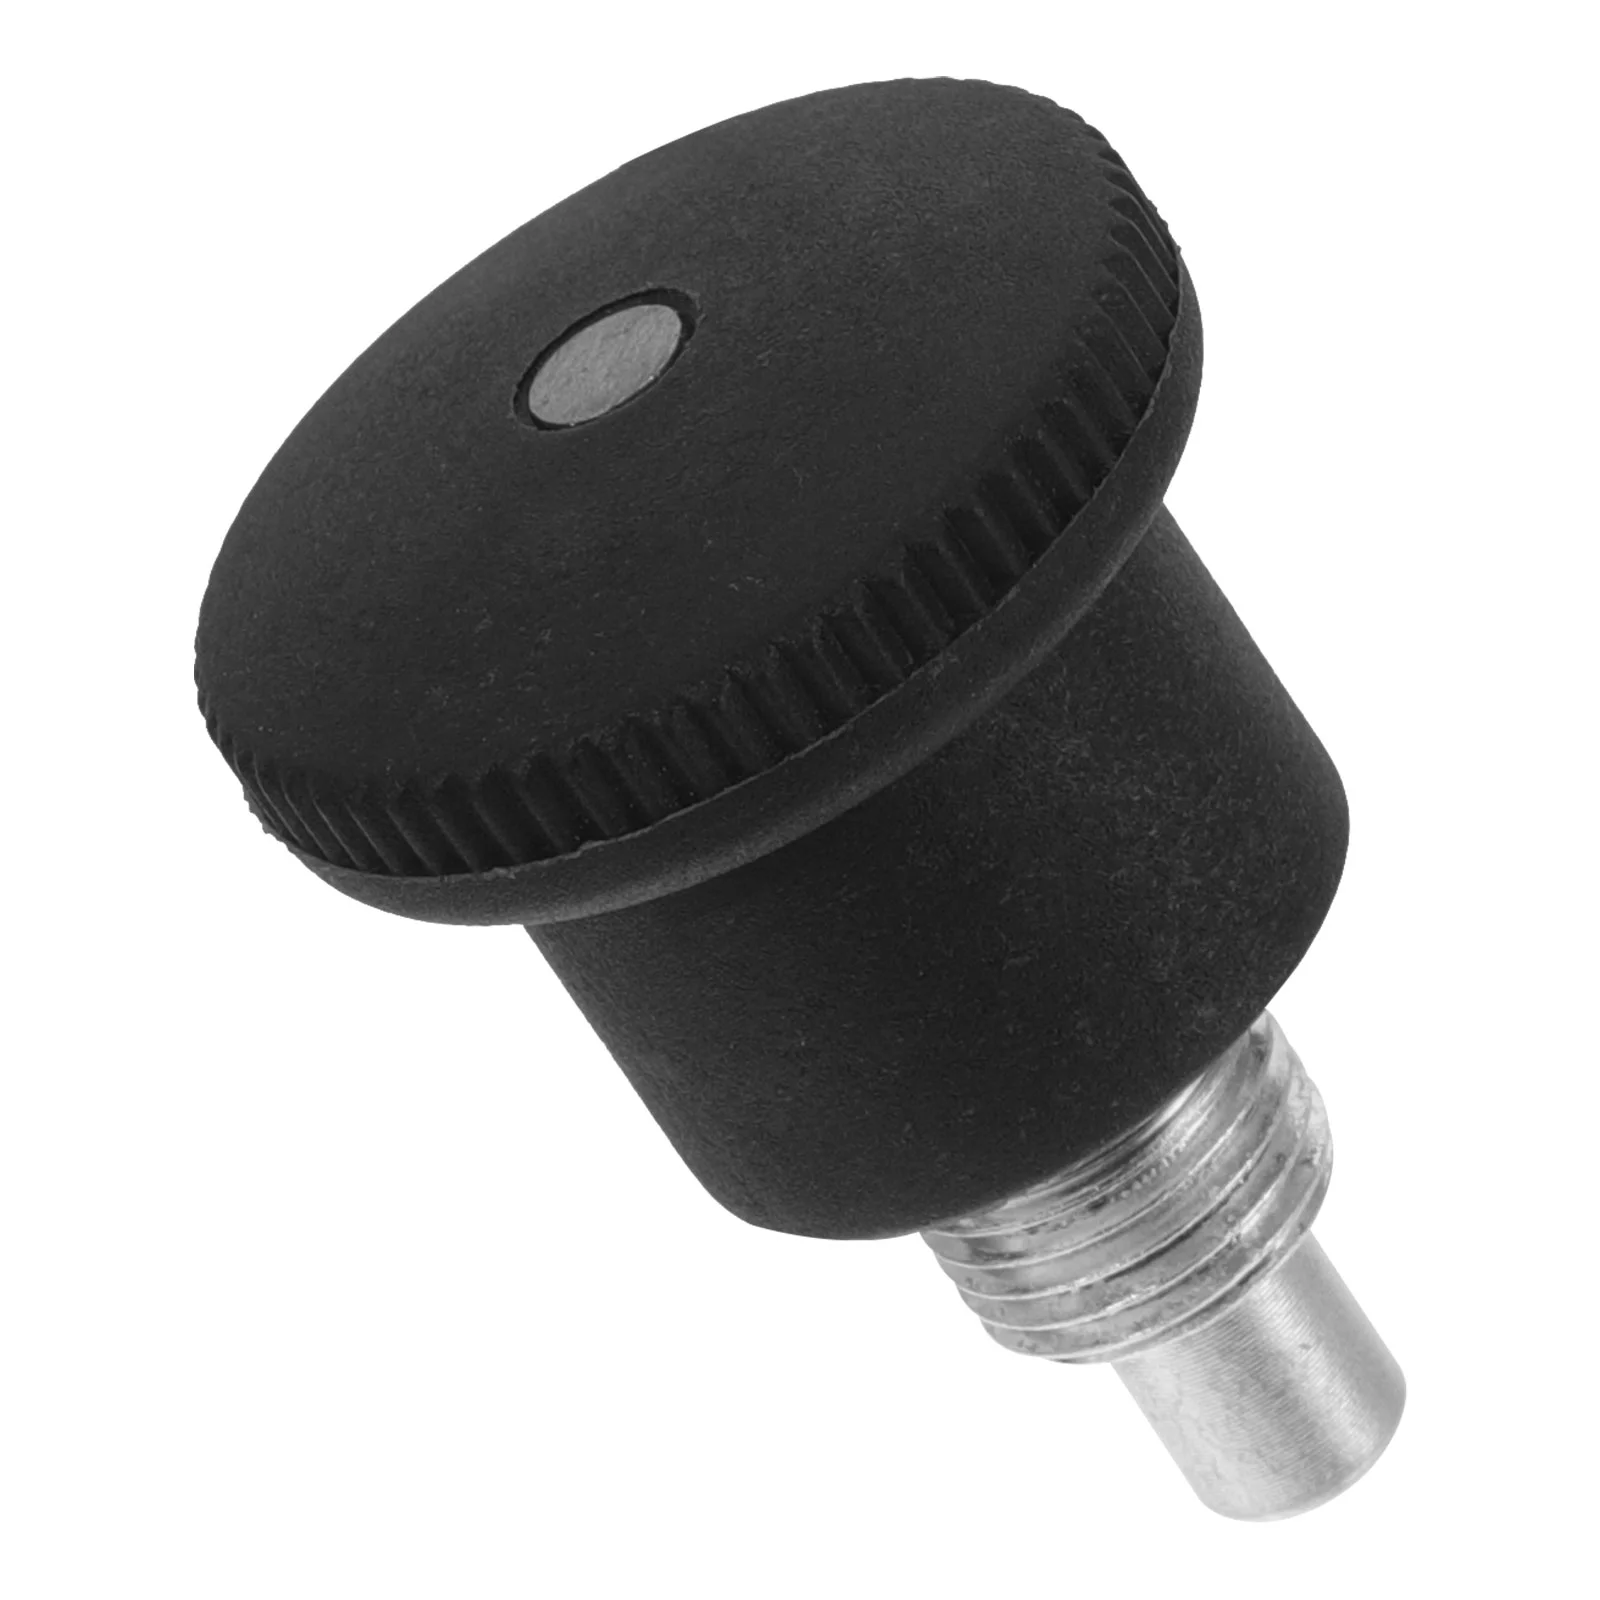 

Spherical Rotating Pull Pin Knob Convenient Screw Replacement For Fitness Exercise Bike Parts Pull-up Bikes Gym Equipment